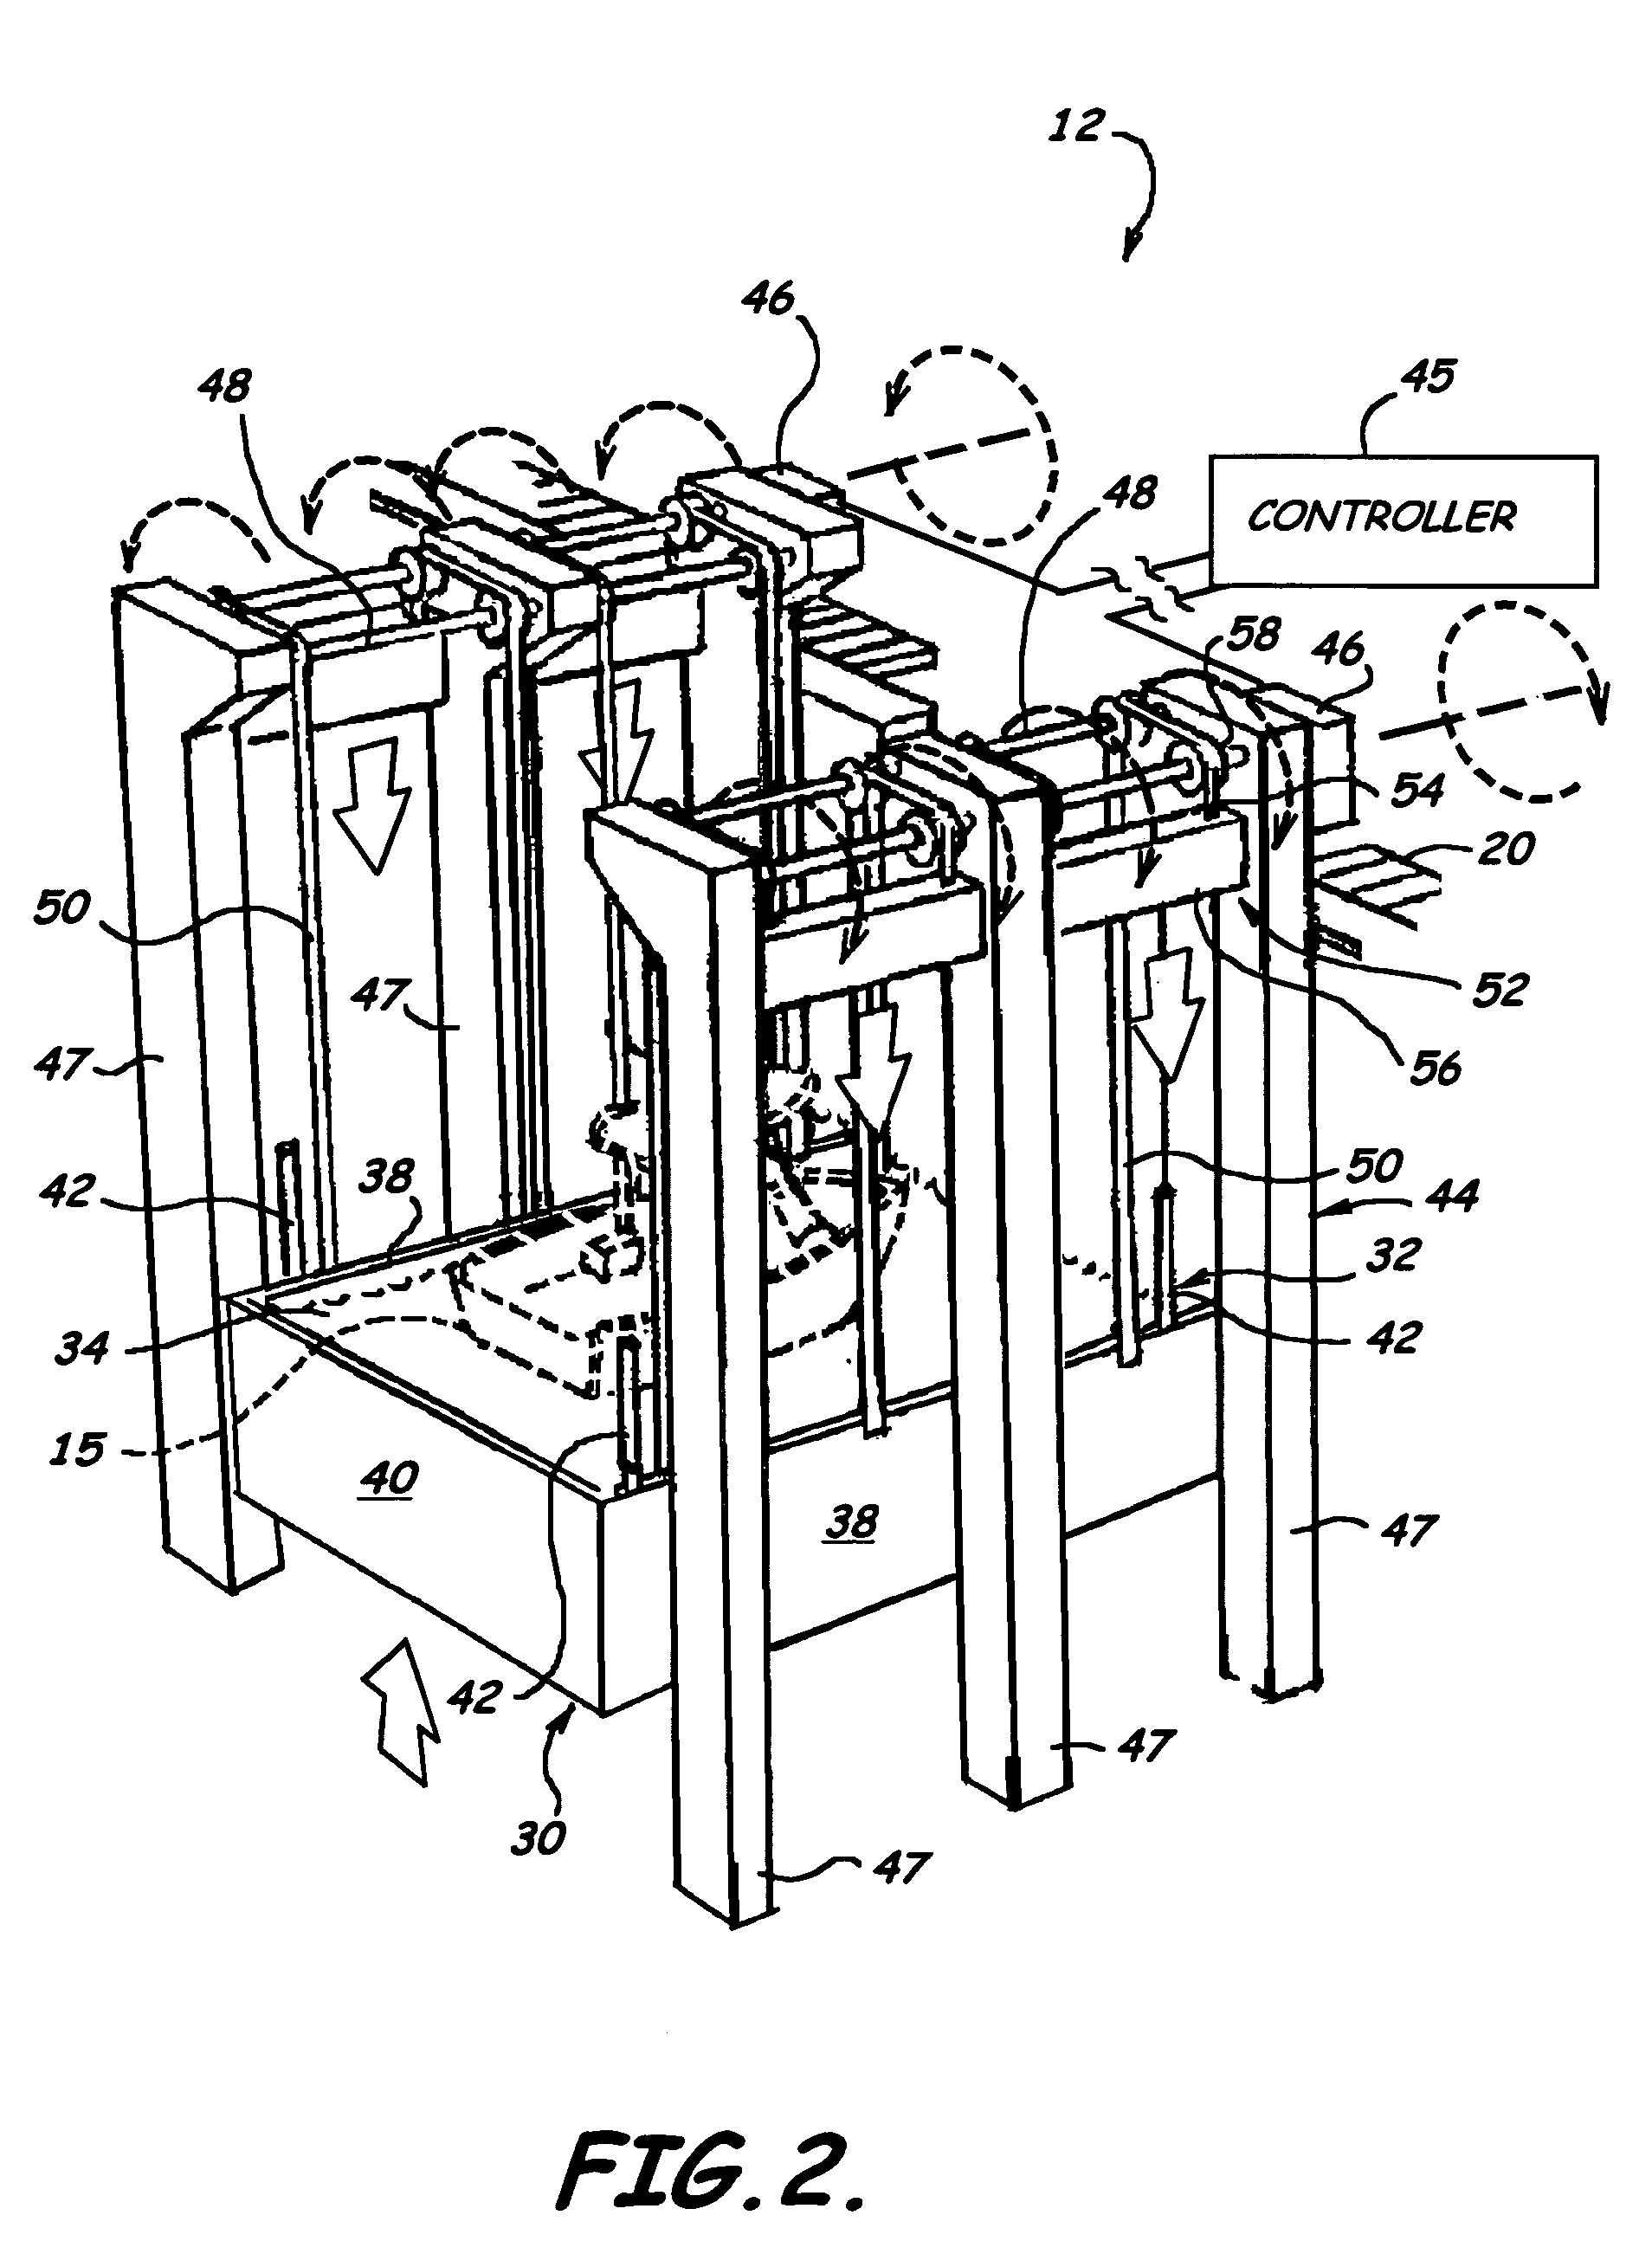 Vessel transfer system and associated methods